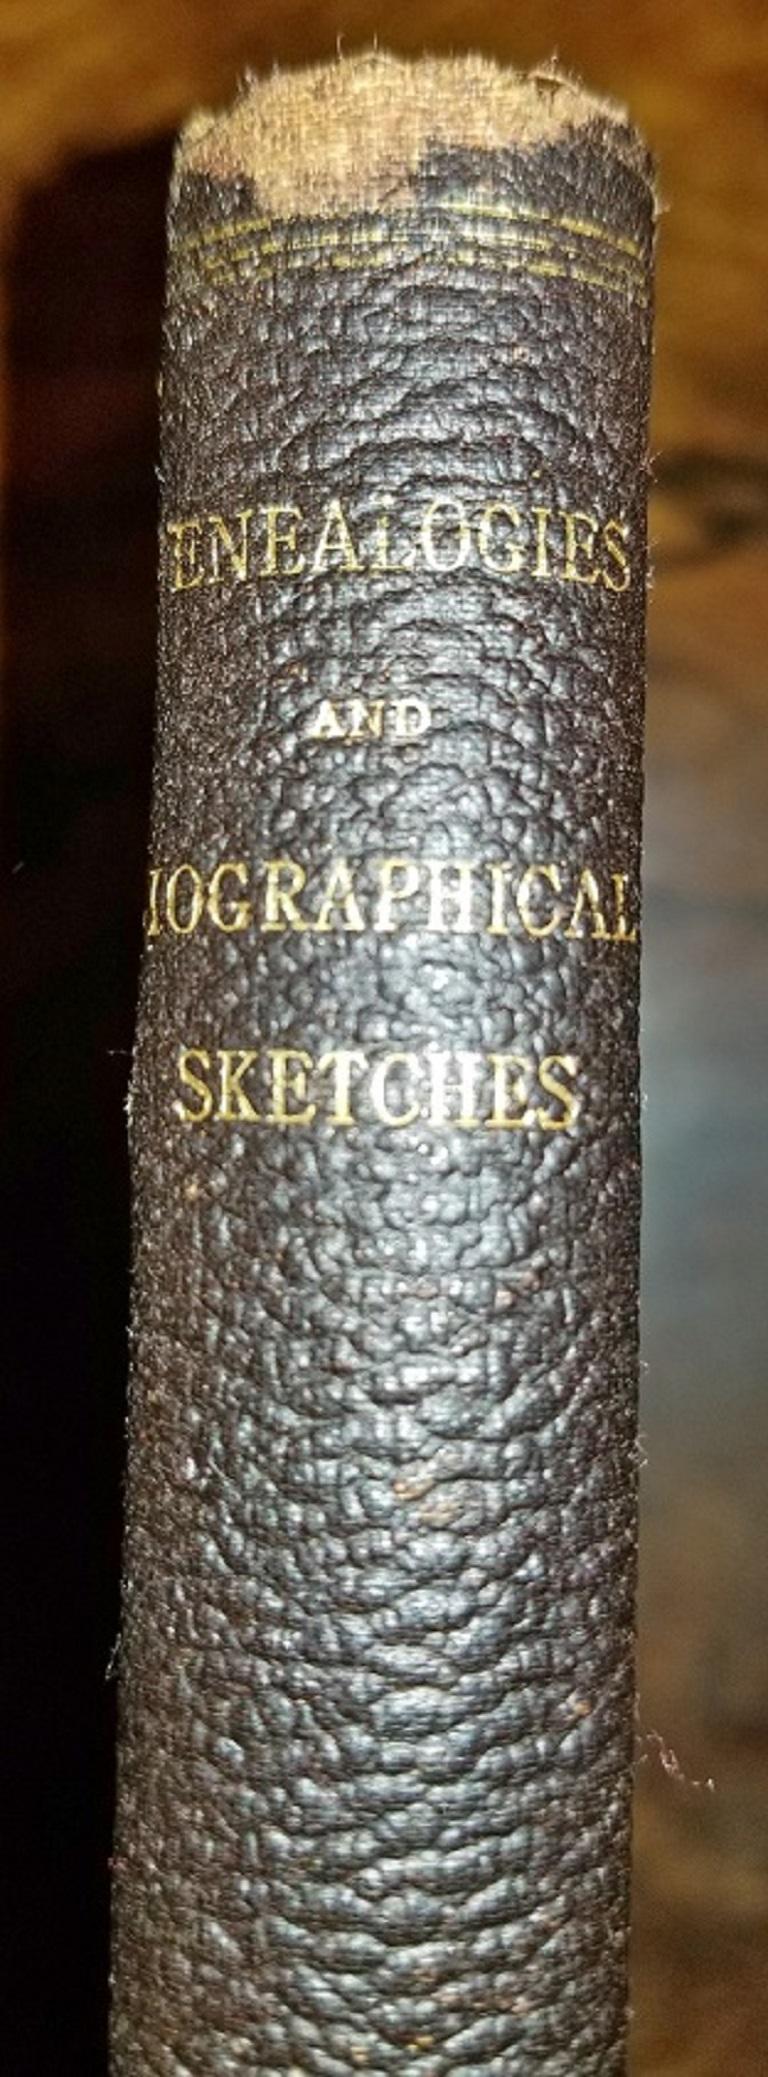 Genealogies and Sketches of Some Old Families of VA and KY by BF Van Meter 1901 In Good Condition For Sale In Dallas, TX